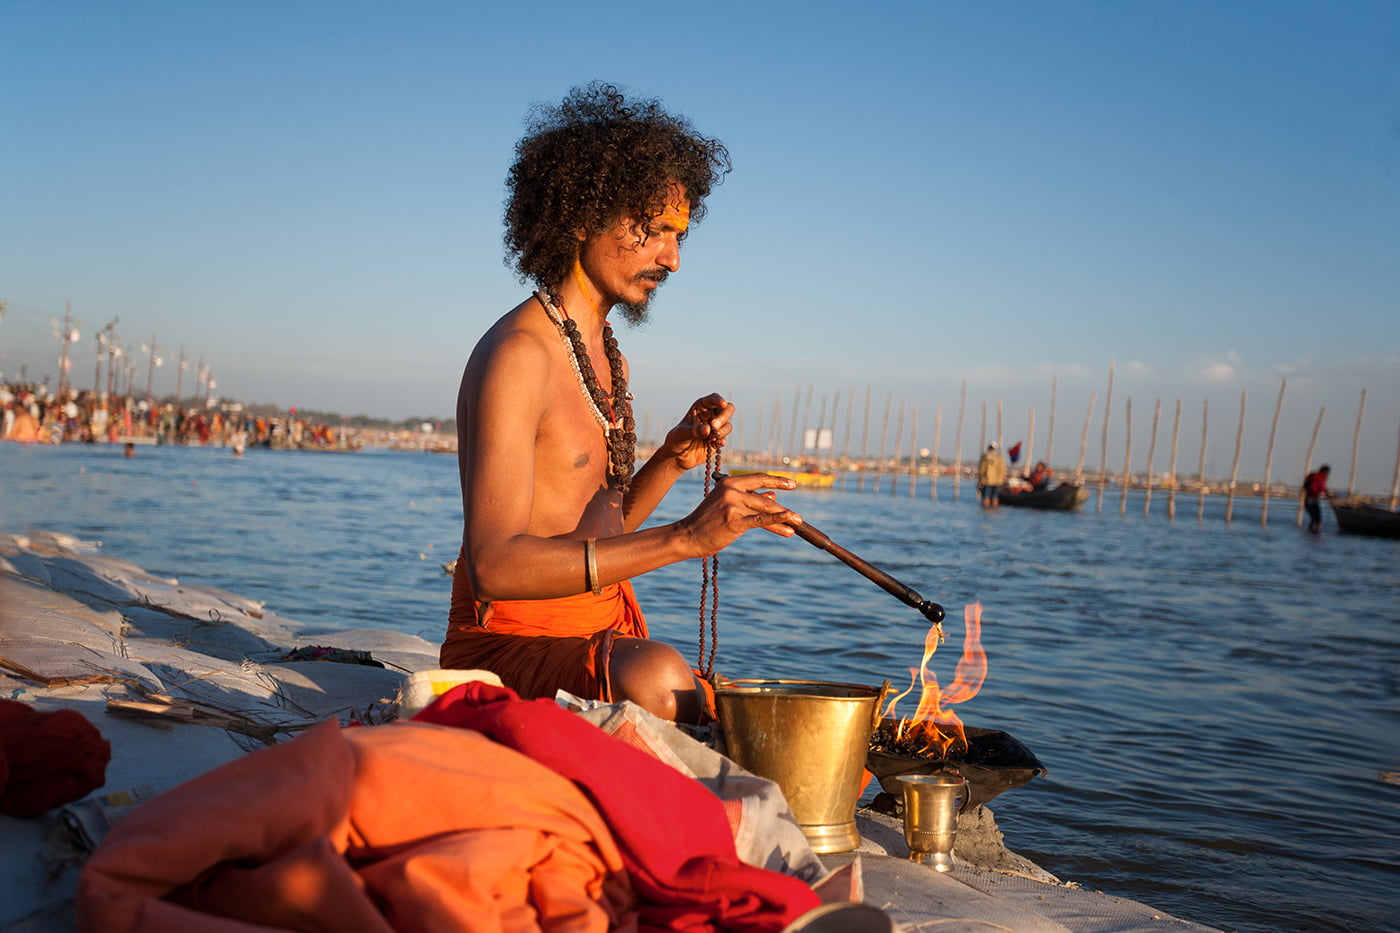 A Sadhu is performing Yaggyan (worship of fire) cerimony on the bank of the Ganges.